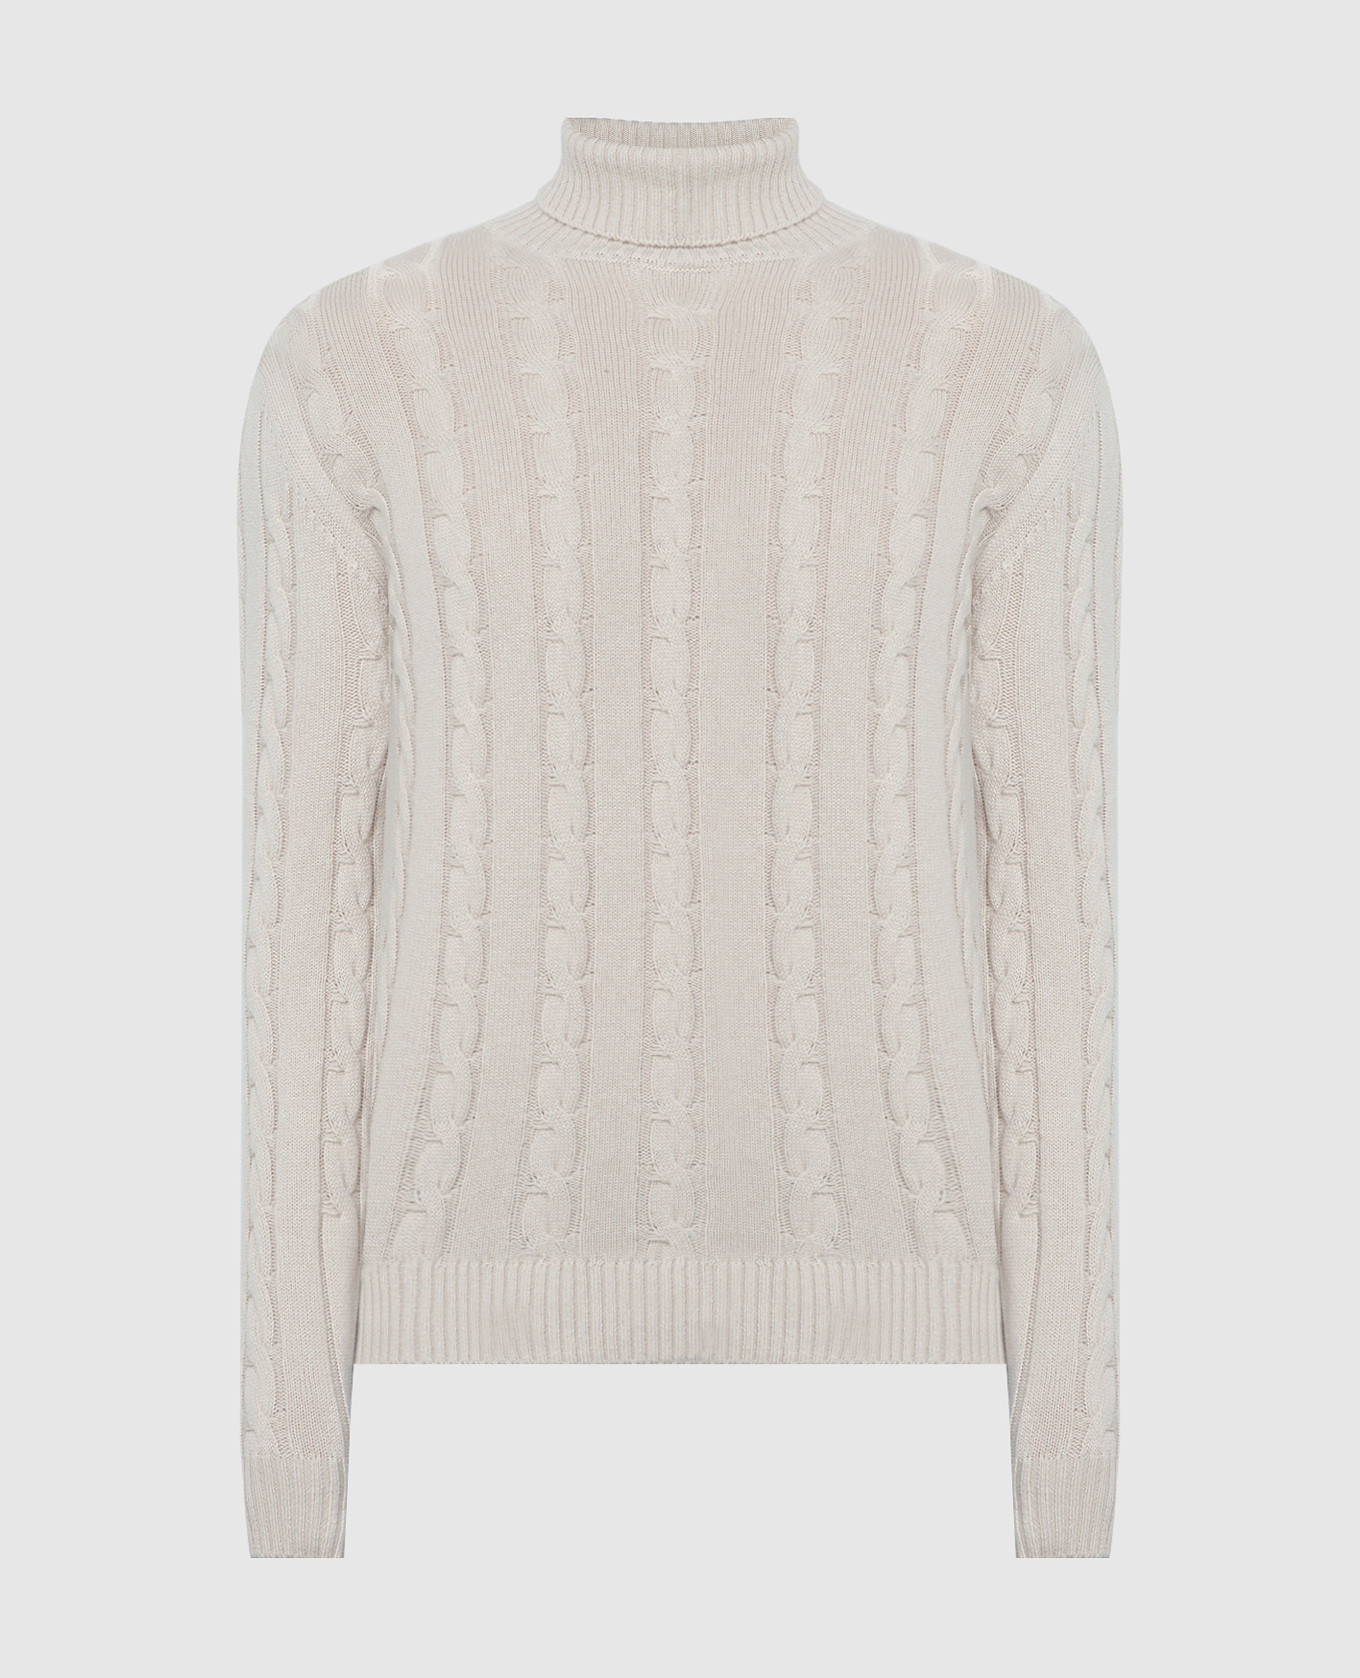 Beige sweater made of cashmere in a textured pattern